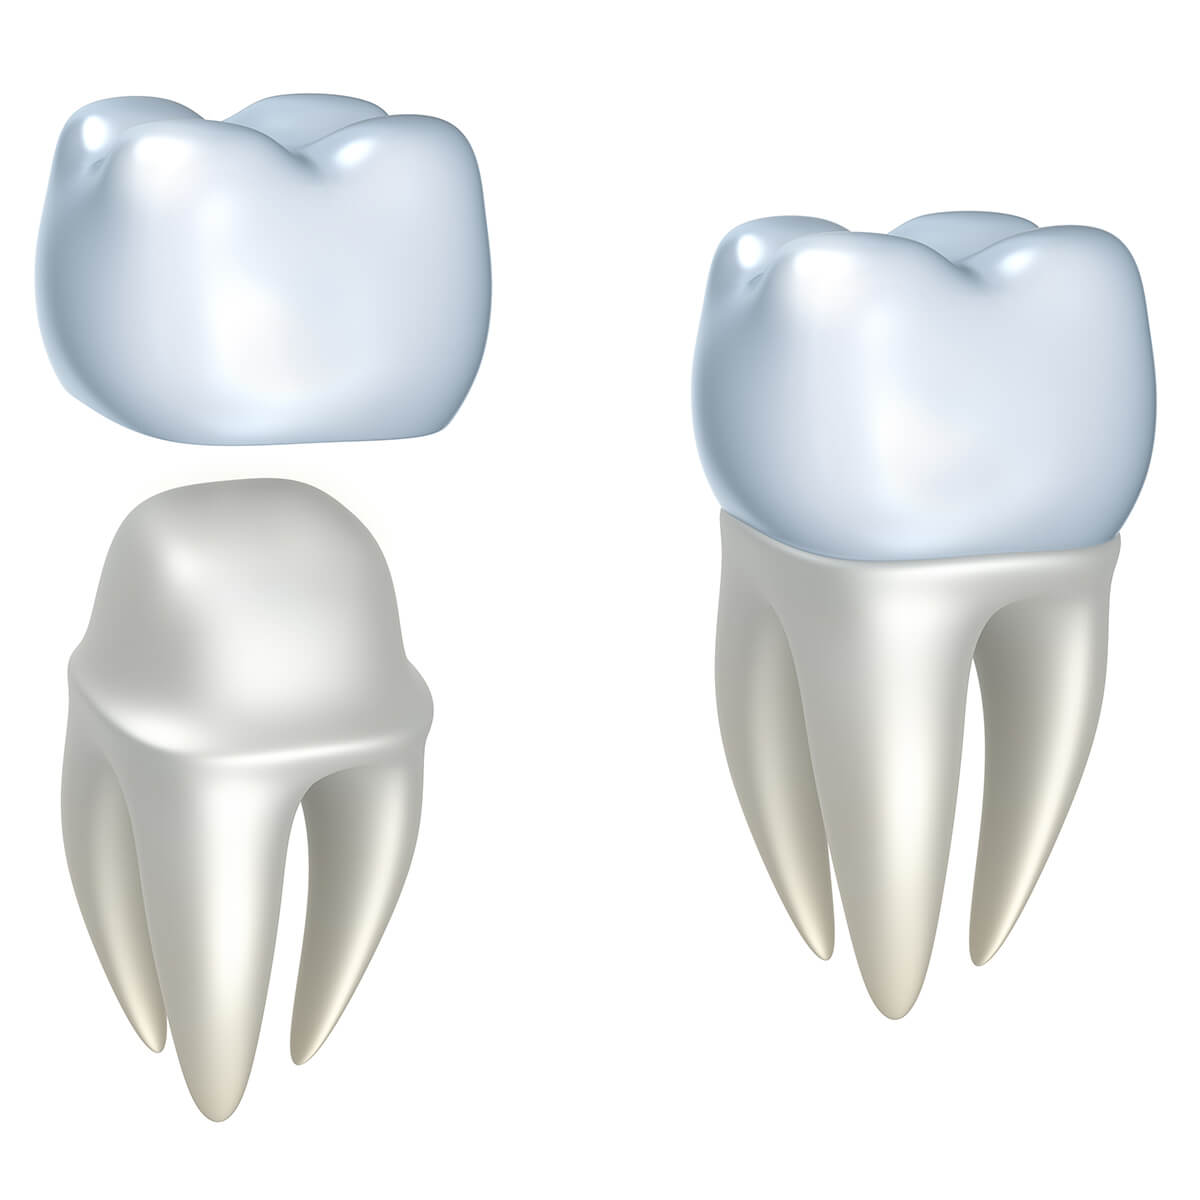 Crowns for Teeth in Knoxville TN Area